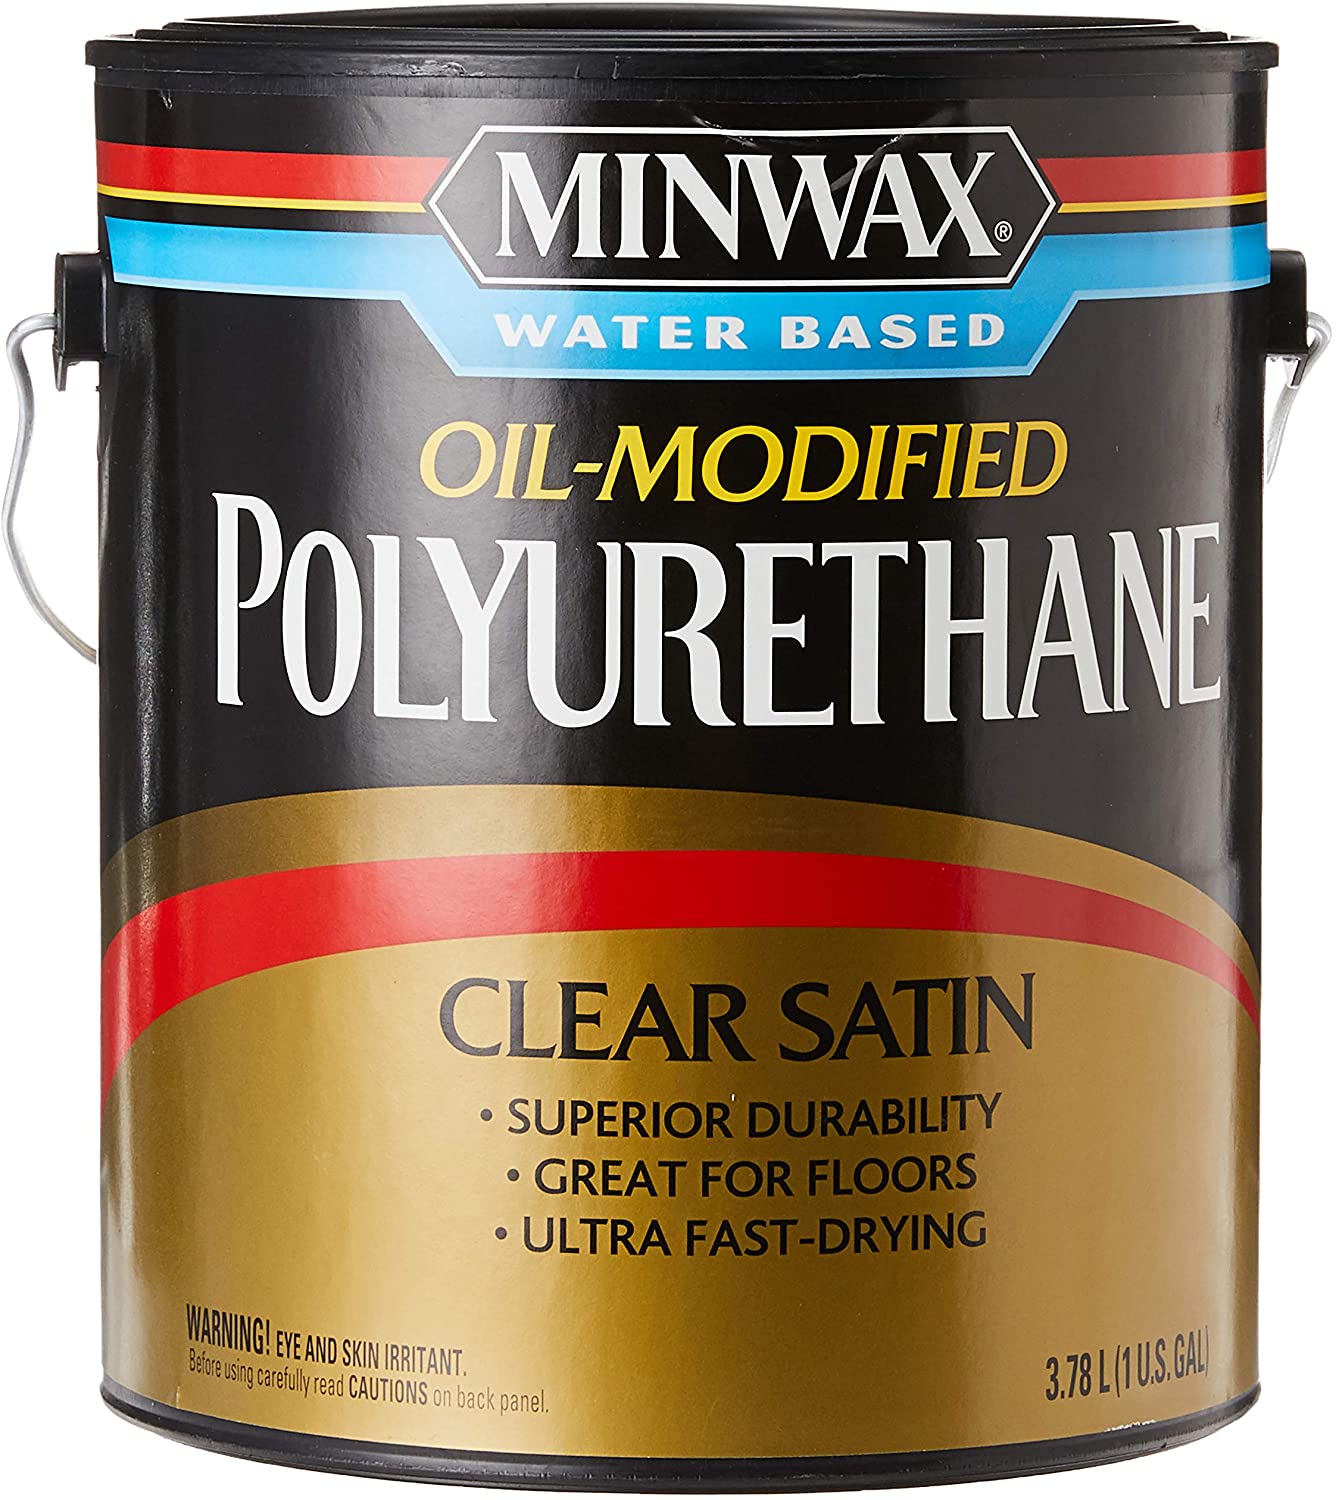 Minwax Water-Based Oil-Modified Polyurethane review